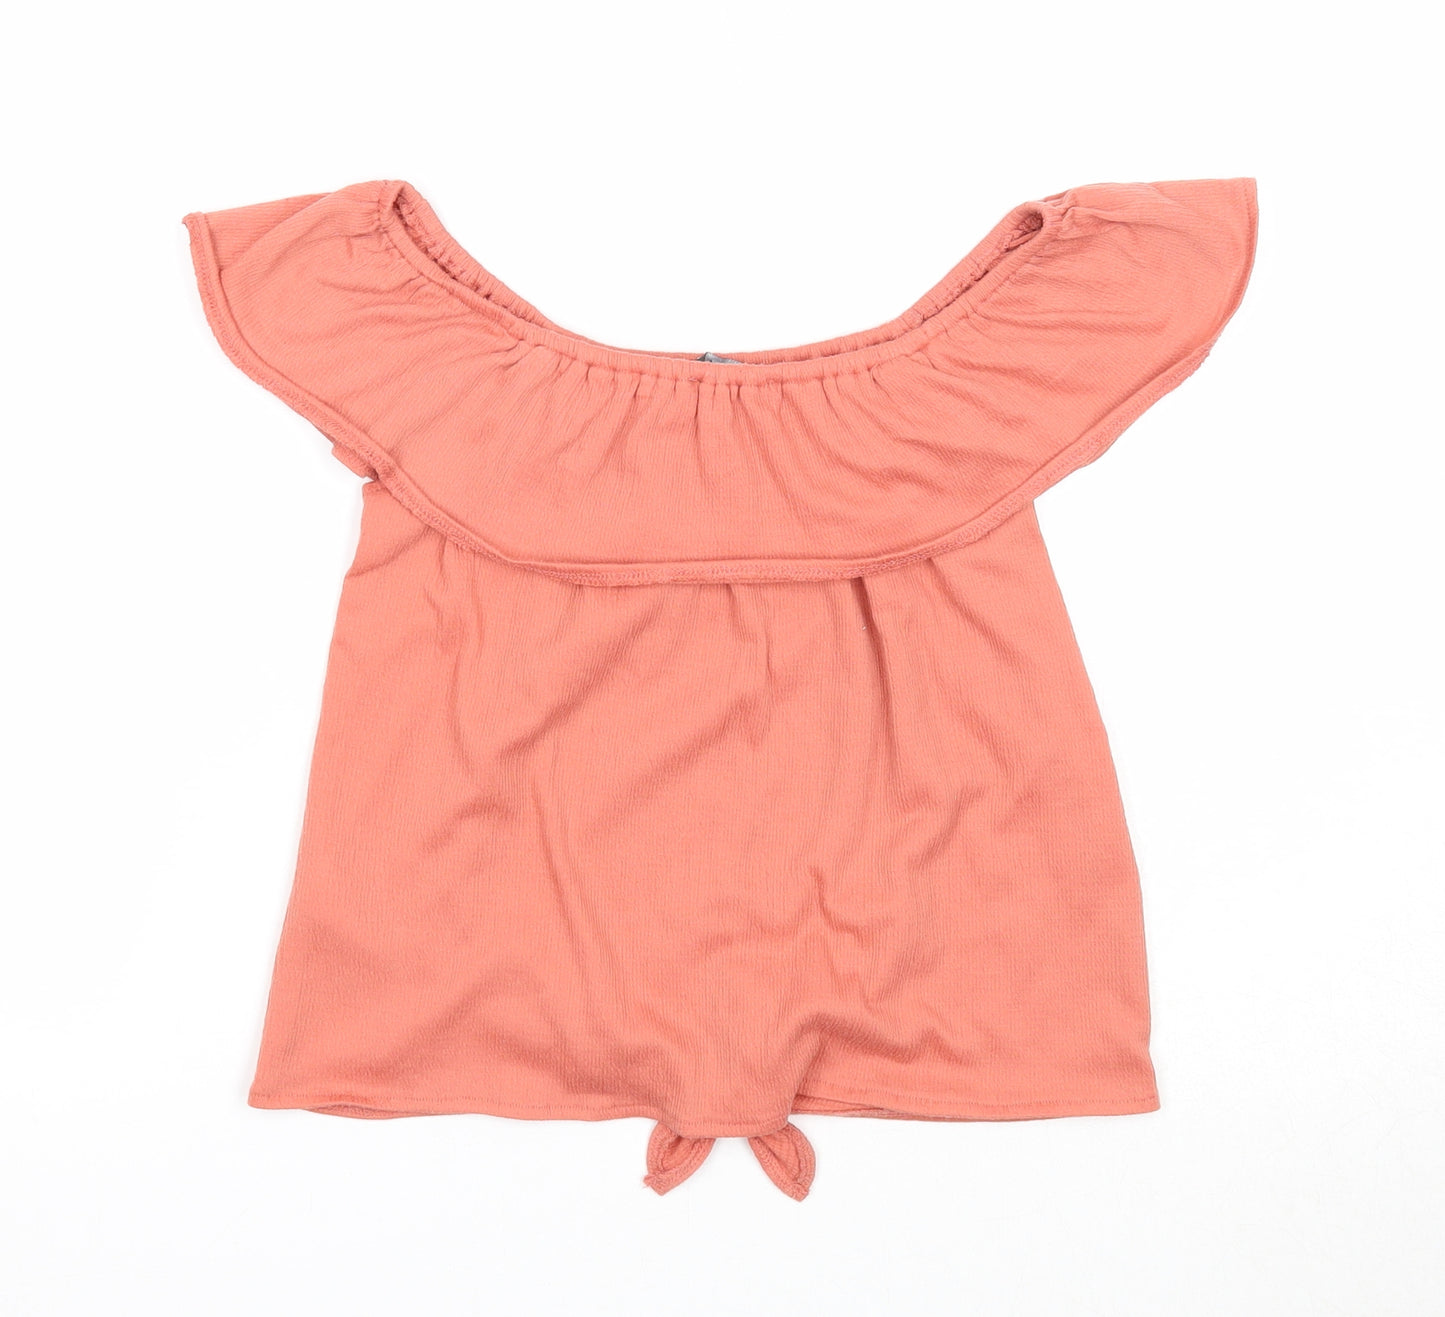 Primark Girls Pink Polyester Basic Blouse Size 10-11 Years Off the Shoulder Pullover - Knot Front